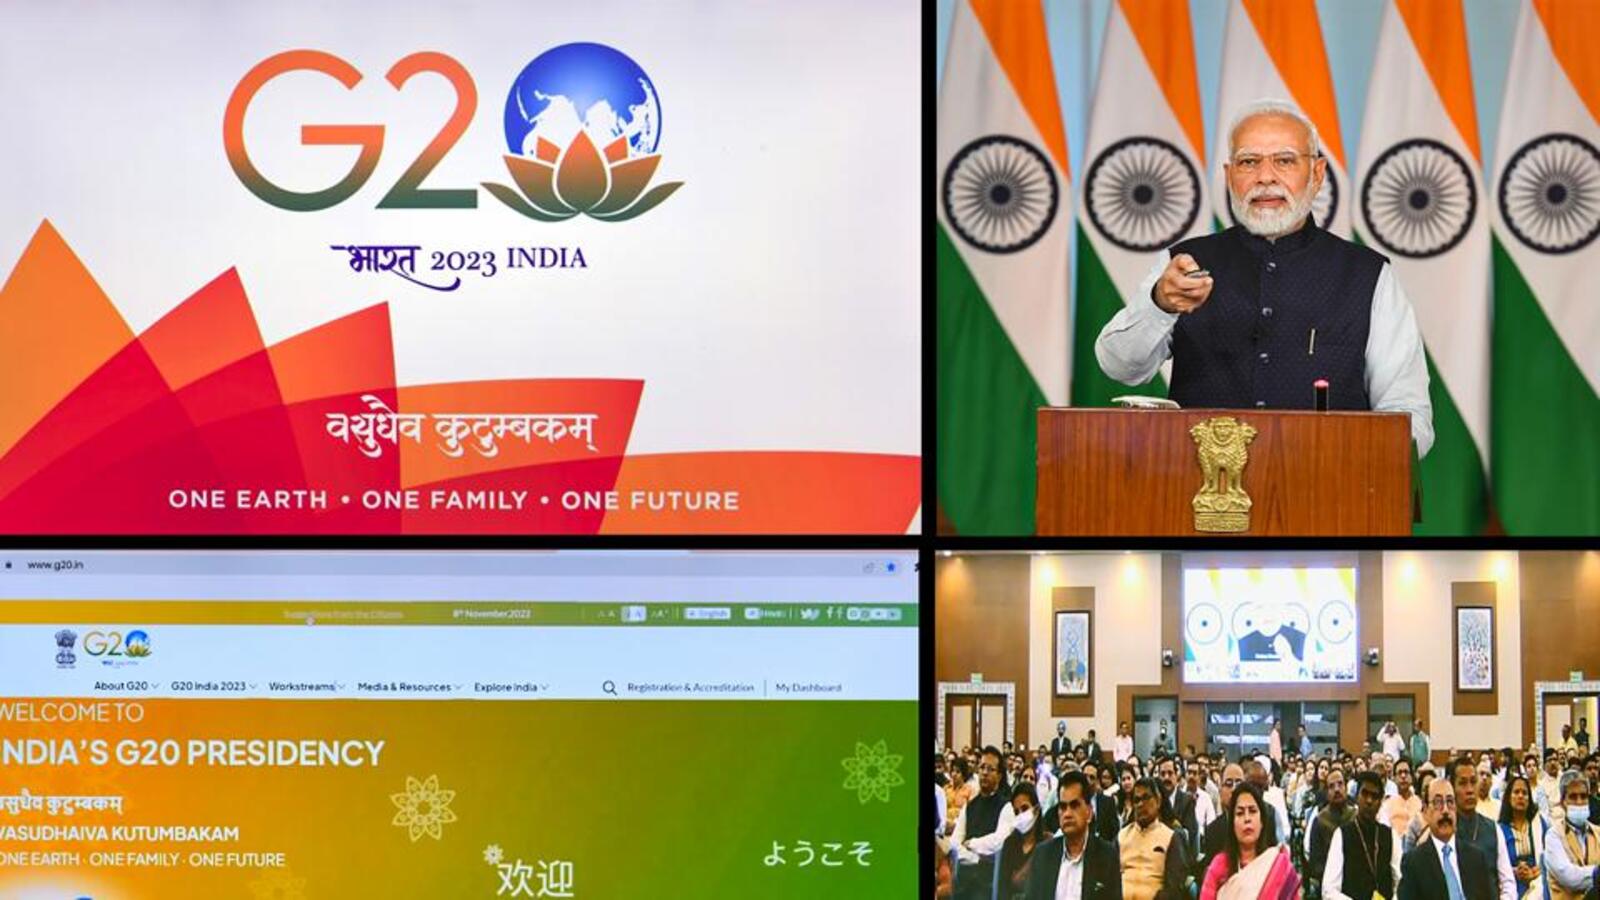 Pm Unveils Logo Of India’s G20 Presidency Explains What It Means To